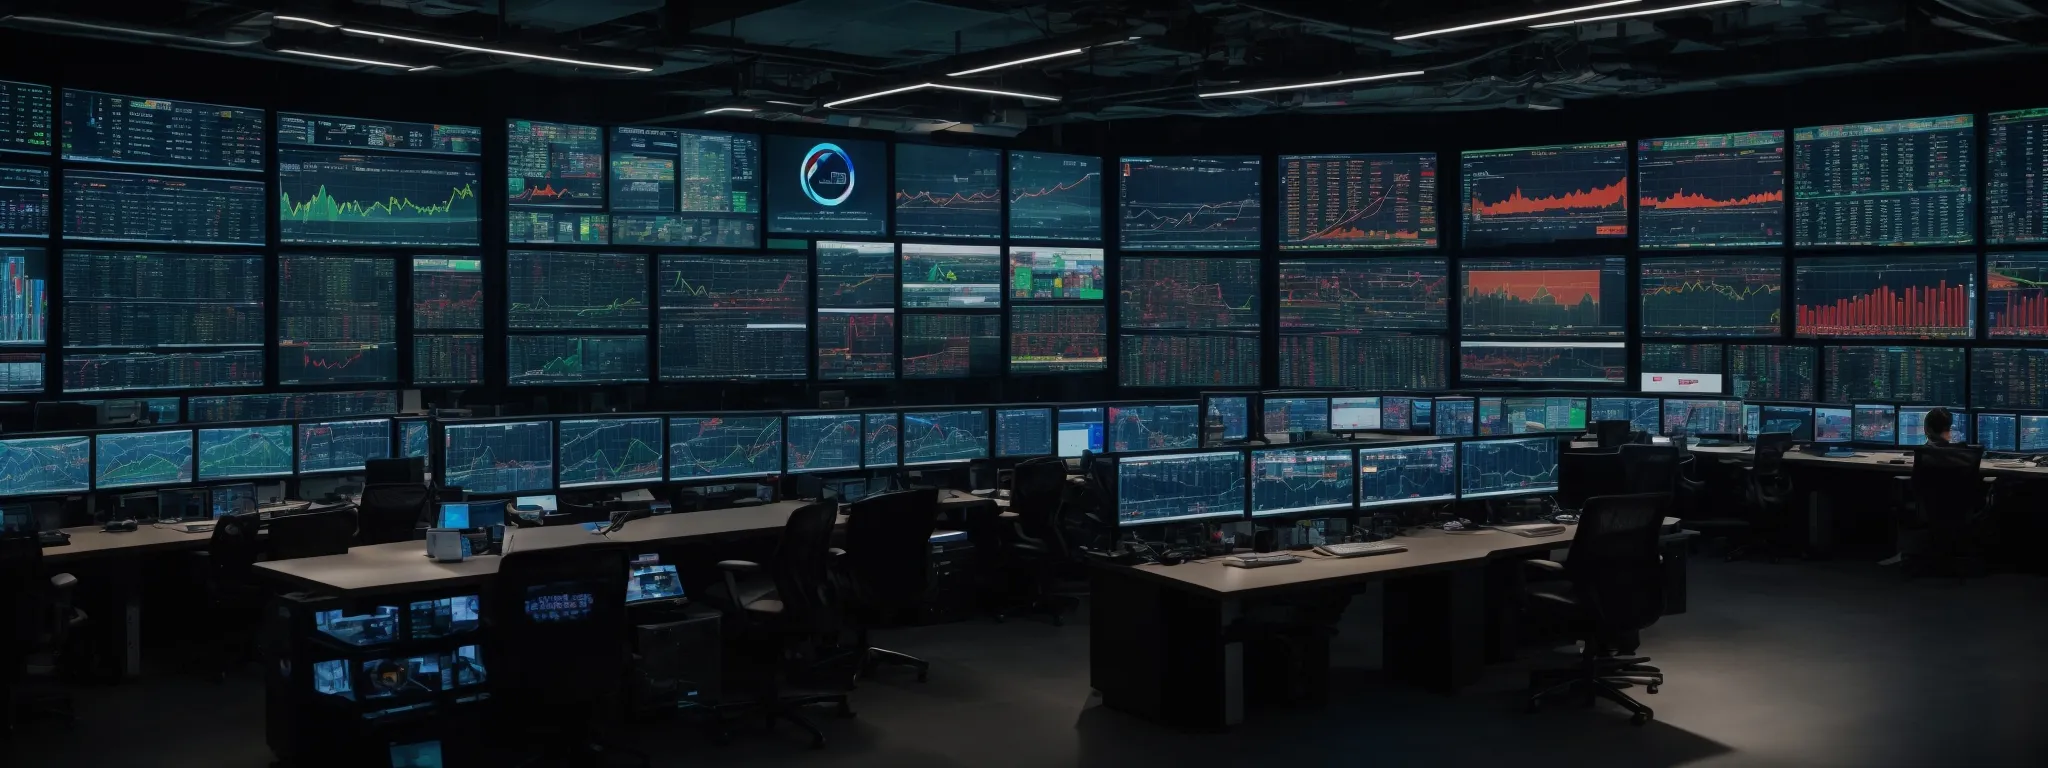 a high-tech control room with a wall of digital screens displaying various market analytics and global data feeds.